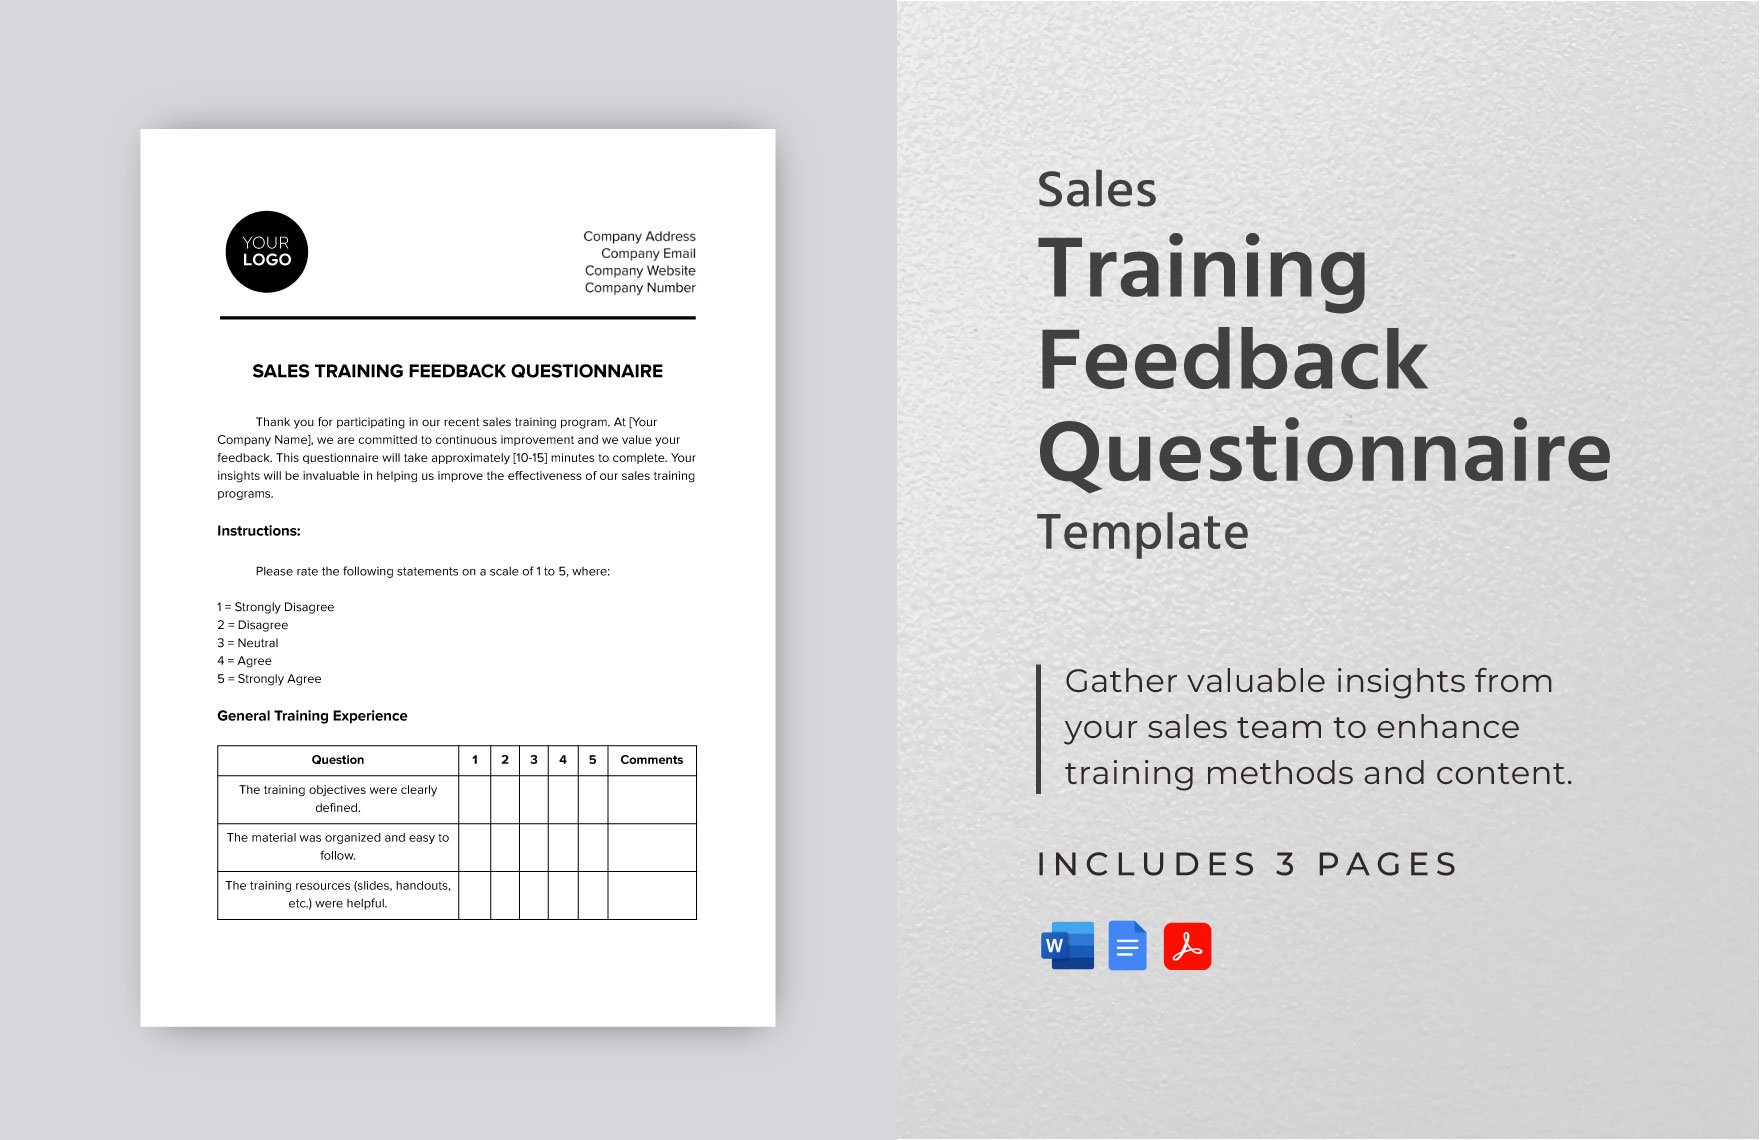 Sales Training Feedback Questionnaire Template